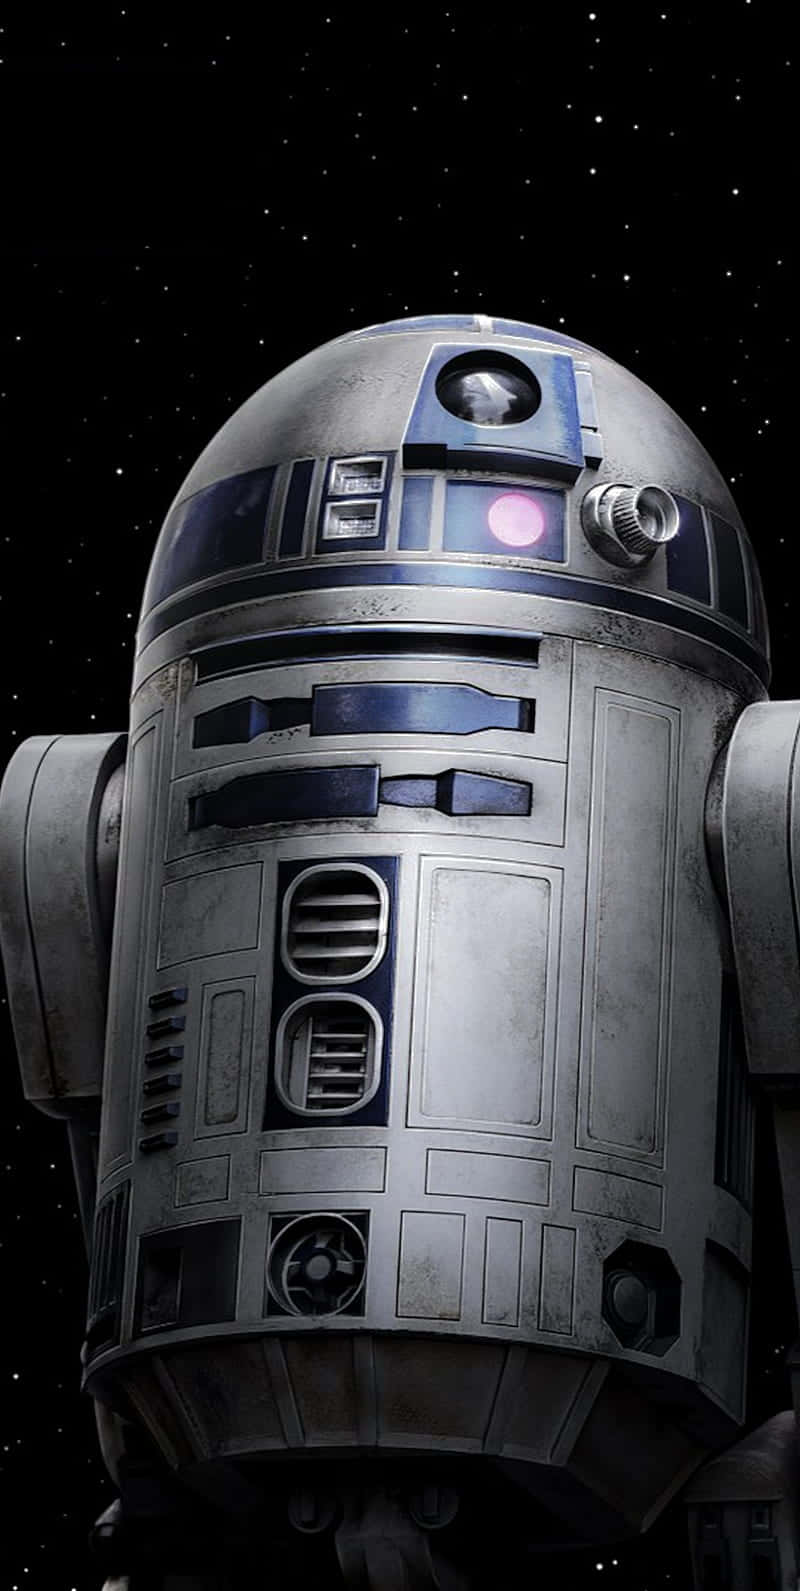 10 Top Star Wars R2D2 Wallpaper FULL HD 1080p For PC Desktop  Star wars  background Star wars wallpaper Star wars pictures